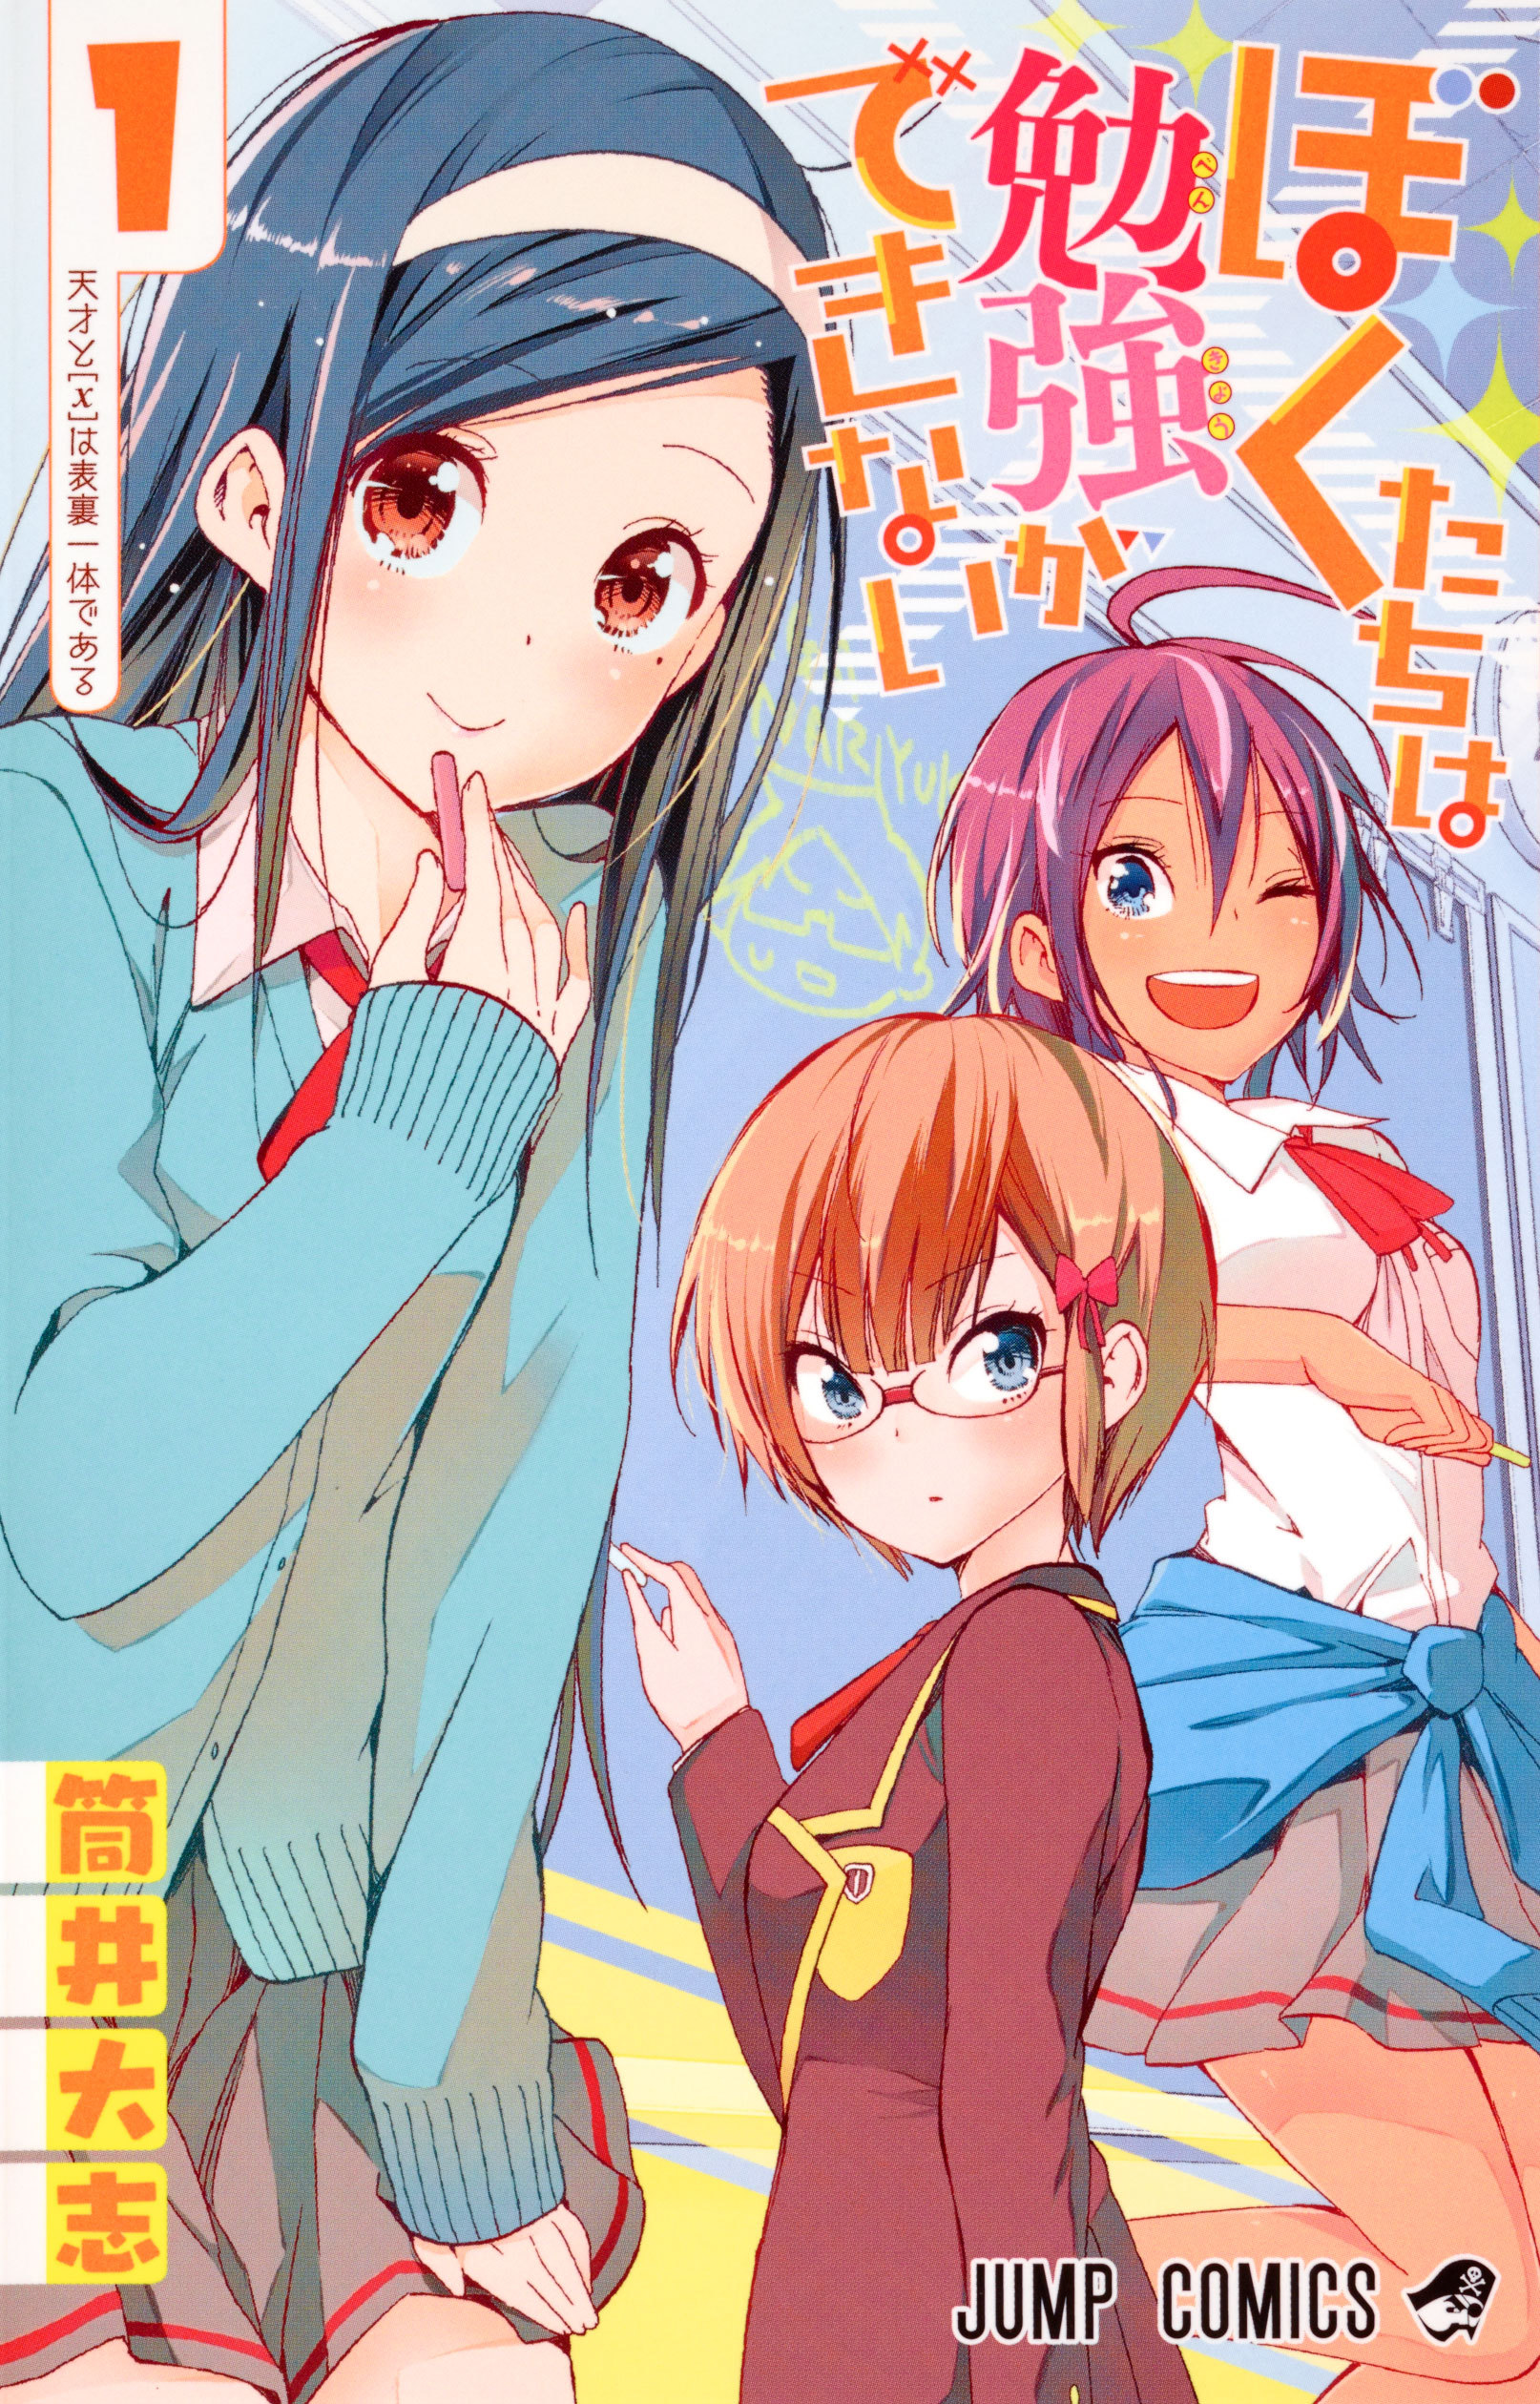 Category:Characters, We Never Learn Wiki